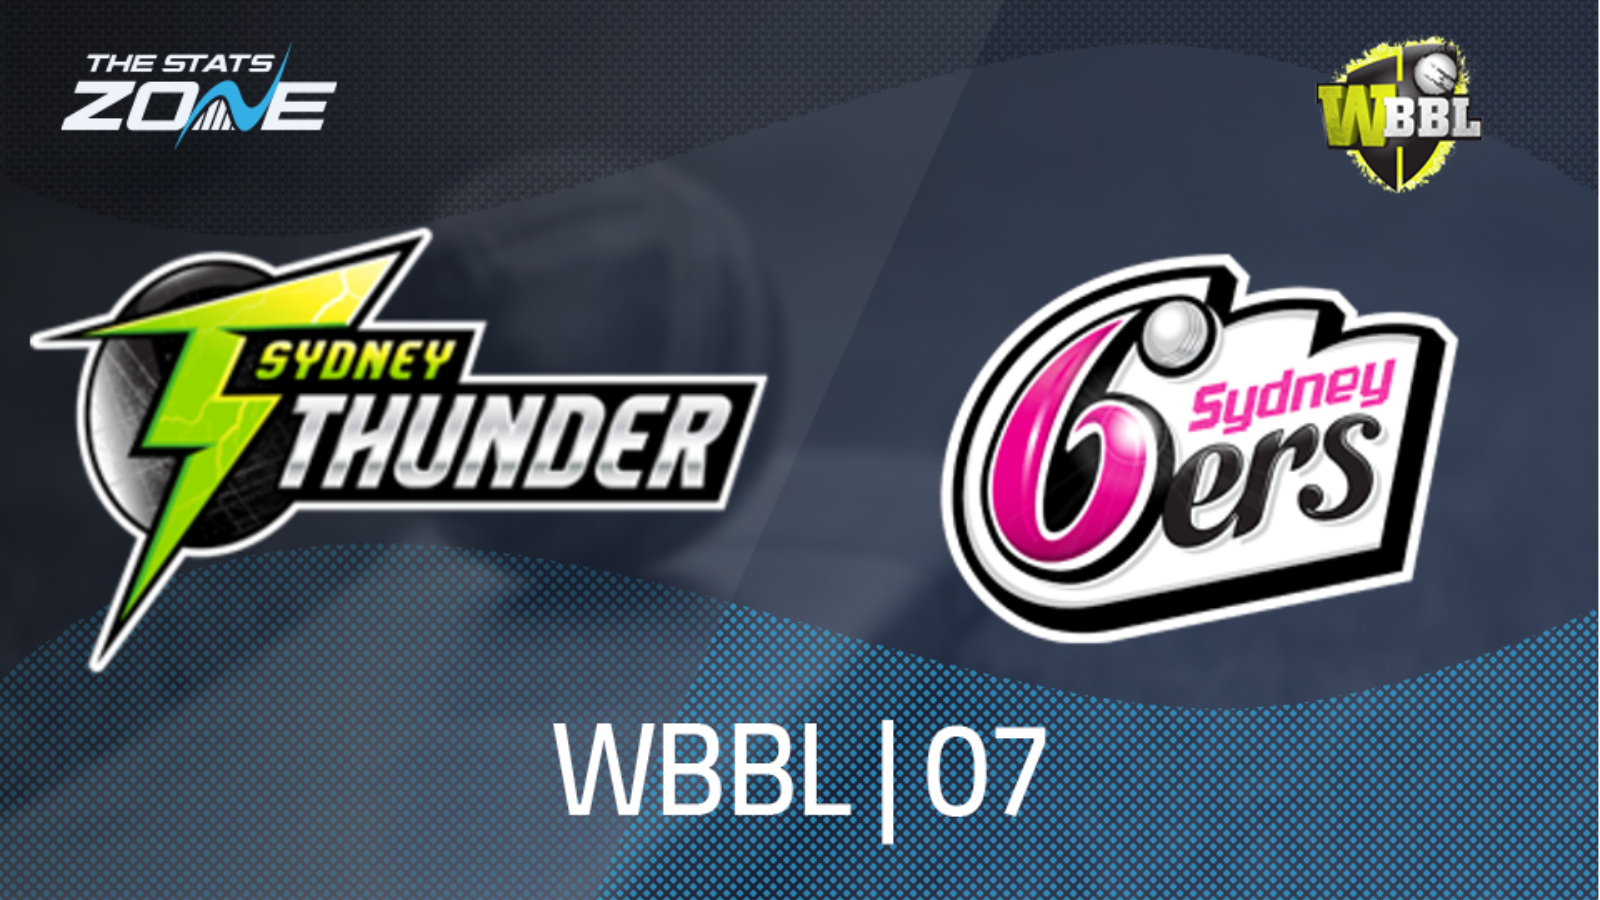 Sydney Thunder Women vs Sydney Sixers Women Preview and Prediction